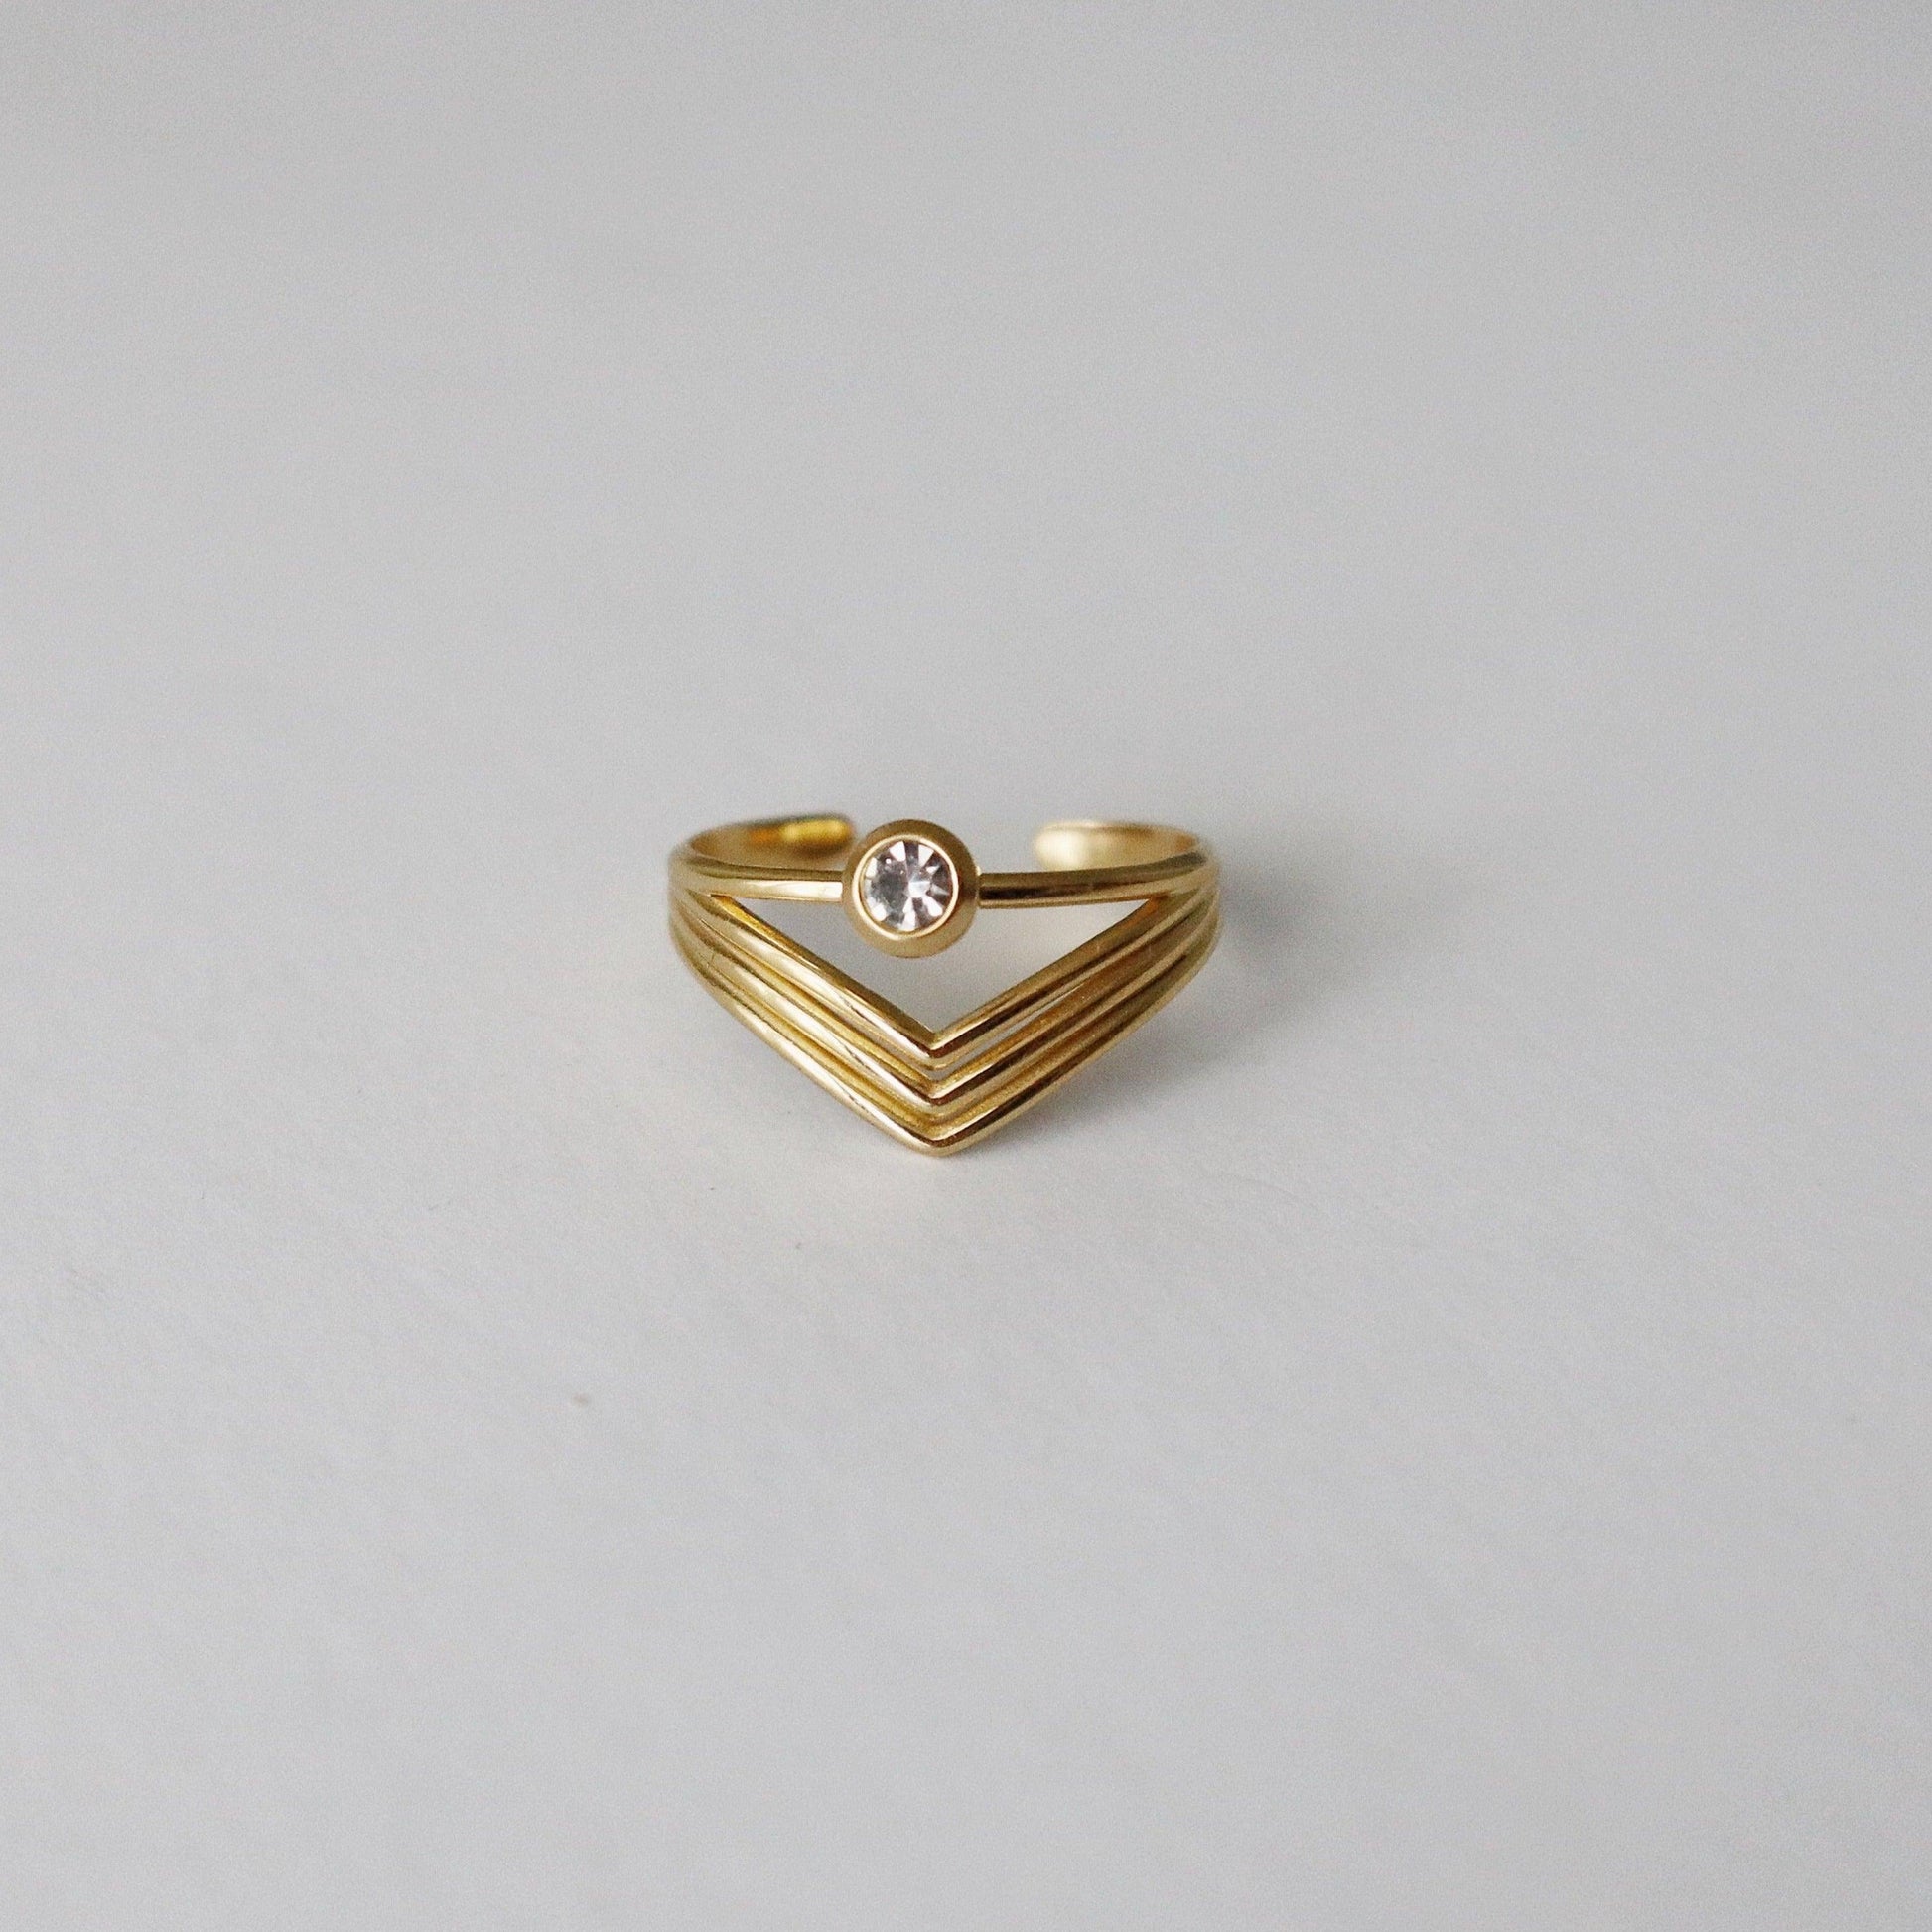 Vera Ring | Adjustable Ring - JESSA JEWELRY | GOLD JEWELRY; dainty, affordable gold everyday jewelry. Tarnish free, water-resistant, hypoallergenic. Jewelry for everyday wear